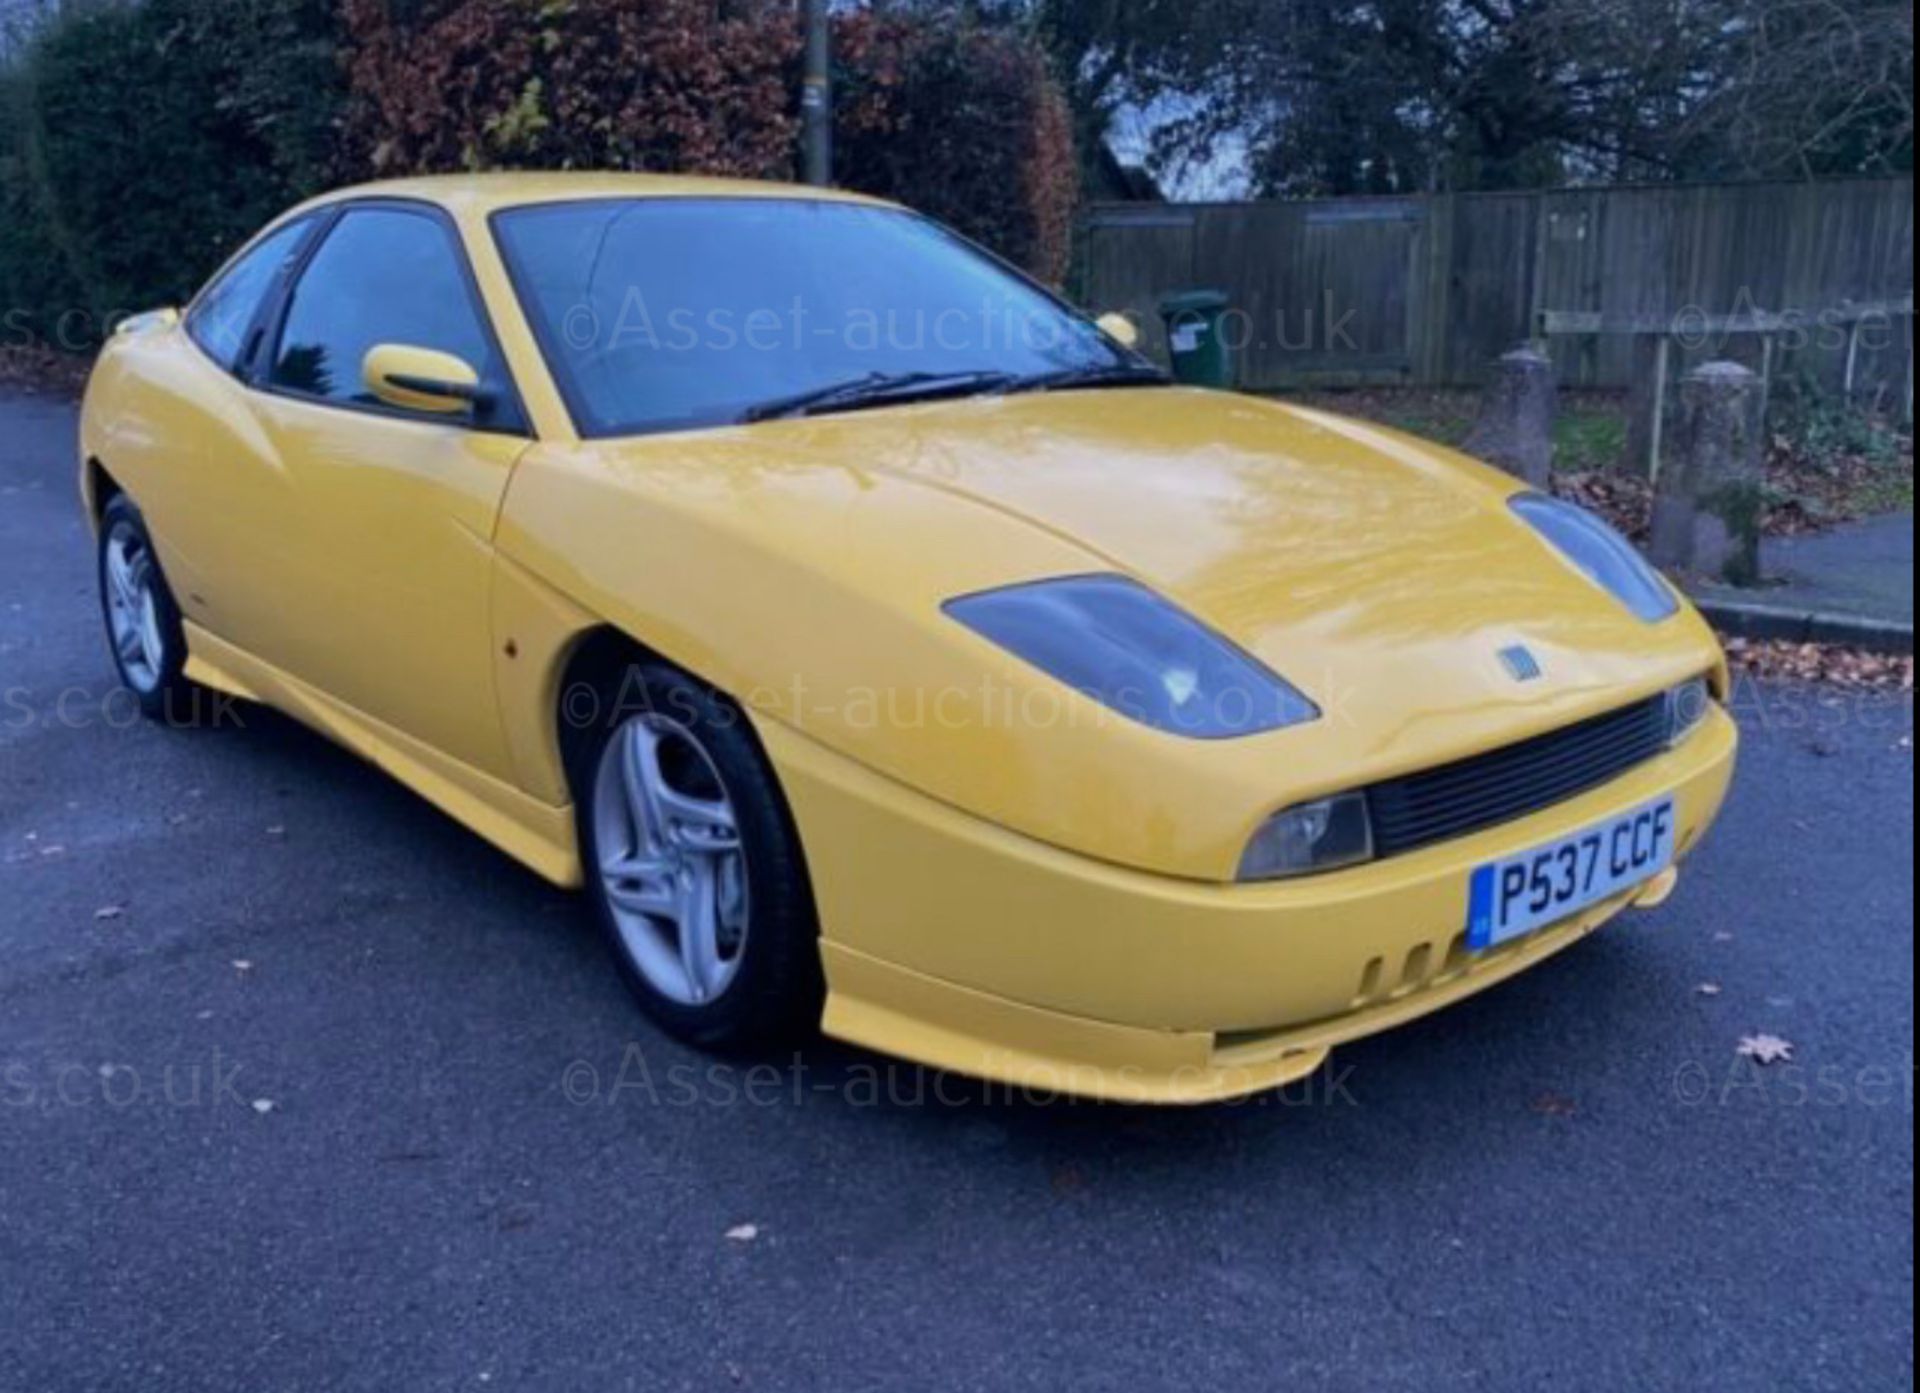 1996 FIAT COUPE 20V TURBO YELLOW SALOON, 2.0 PETROL ENGINE, SHOWING 95K MILES *NO VAT* - Image 2 of 12